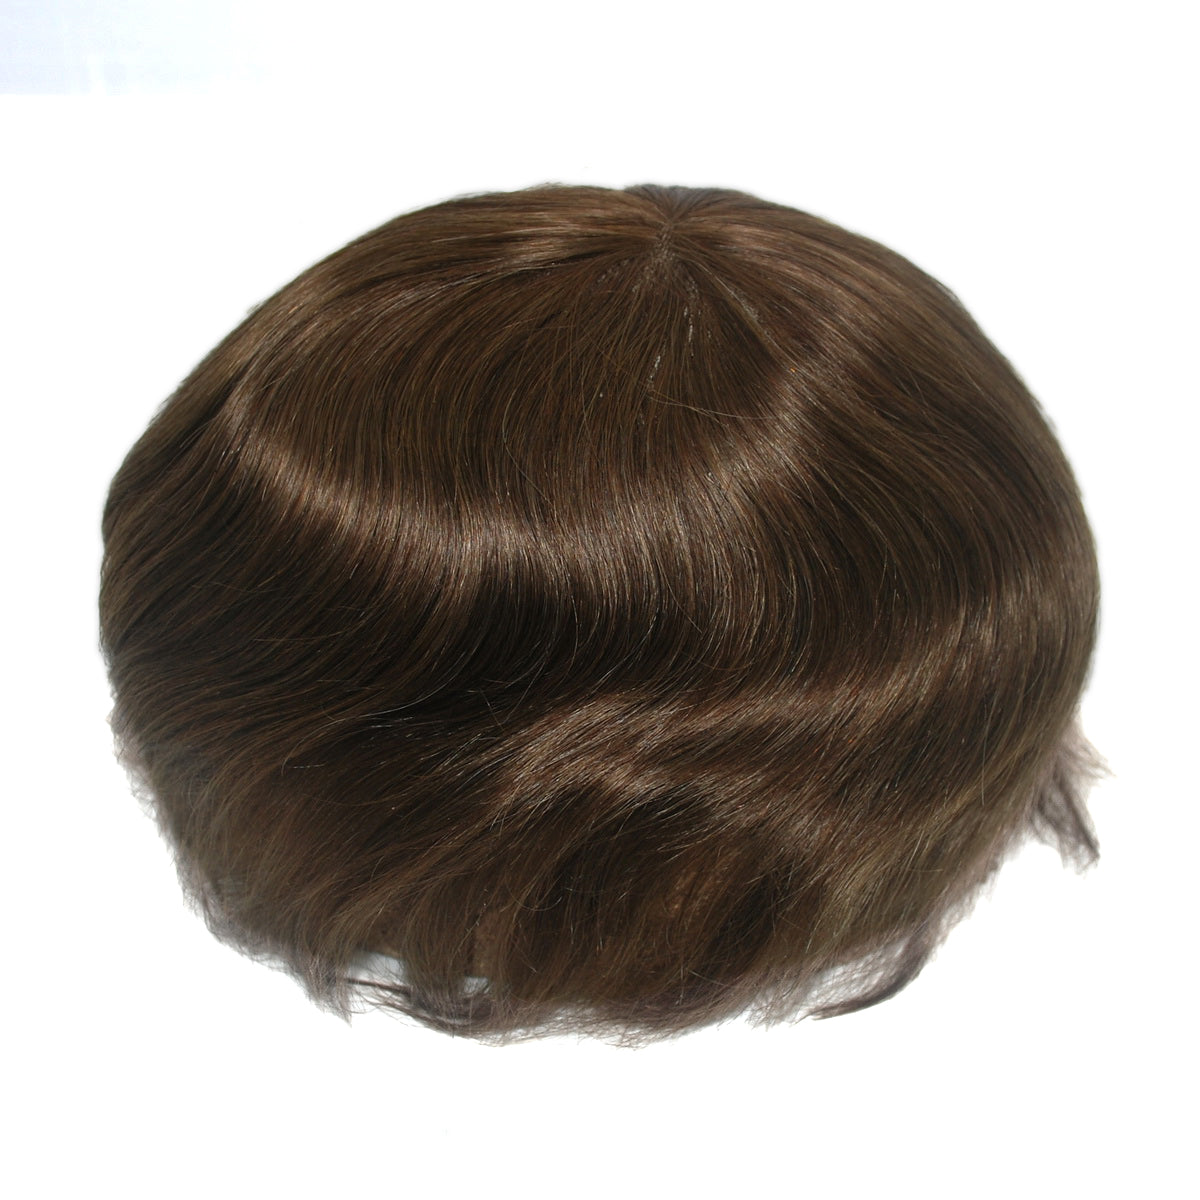 #4 medium brown toupee for men French lace PU with back and sides lace front hair piece